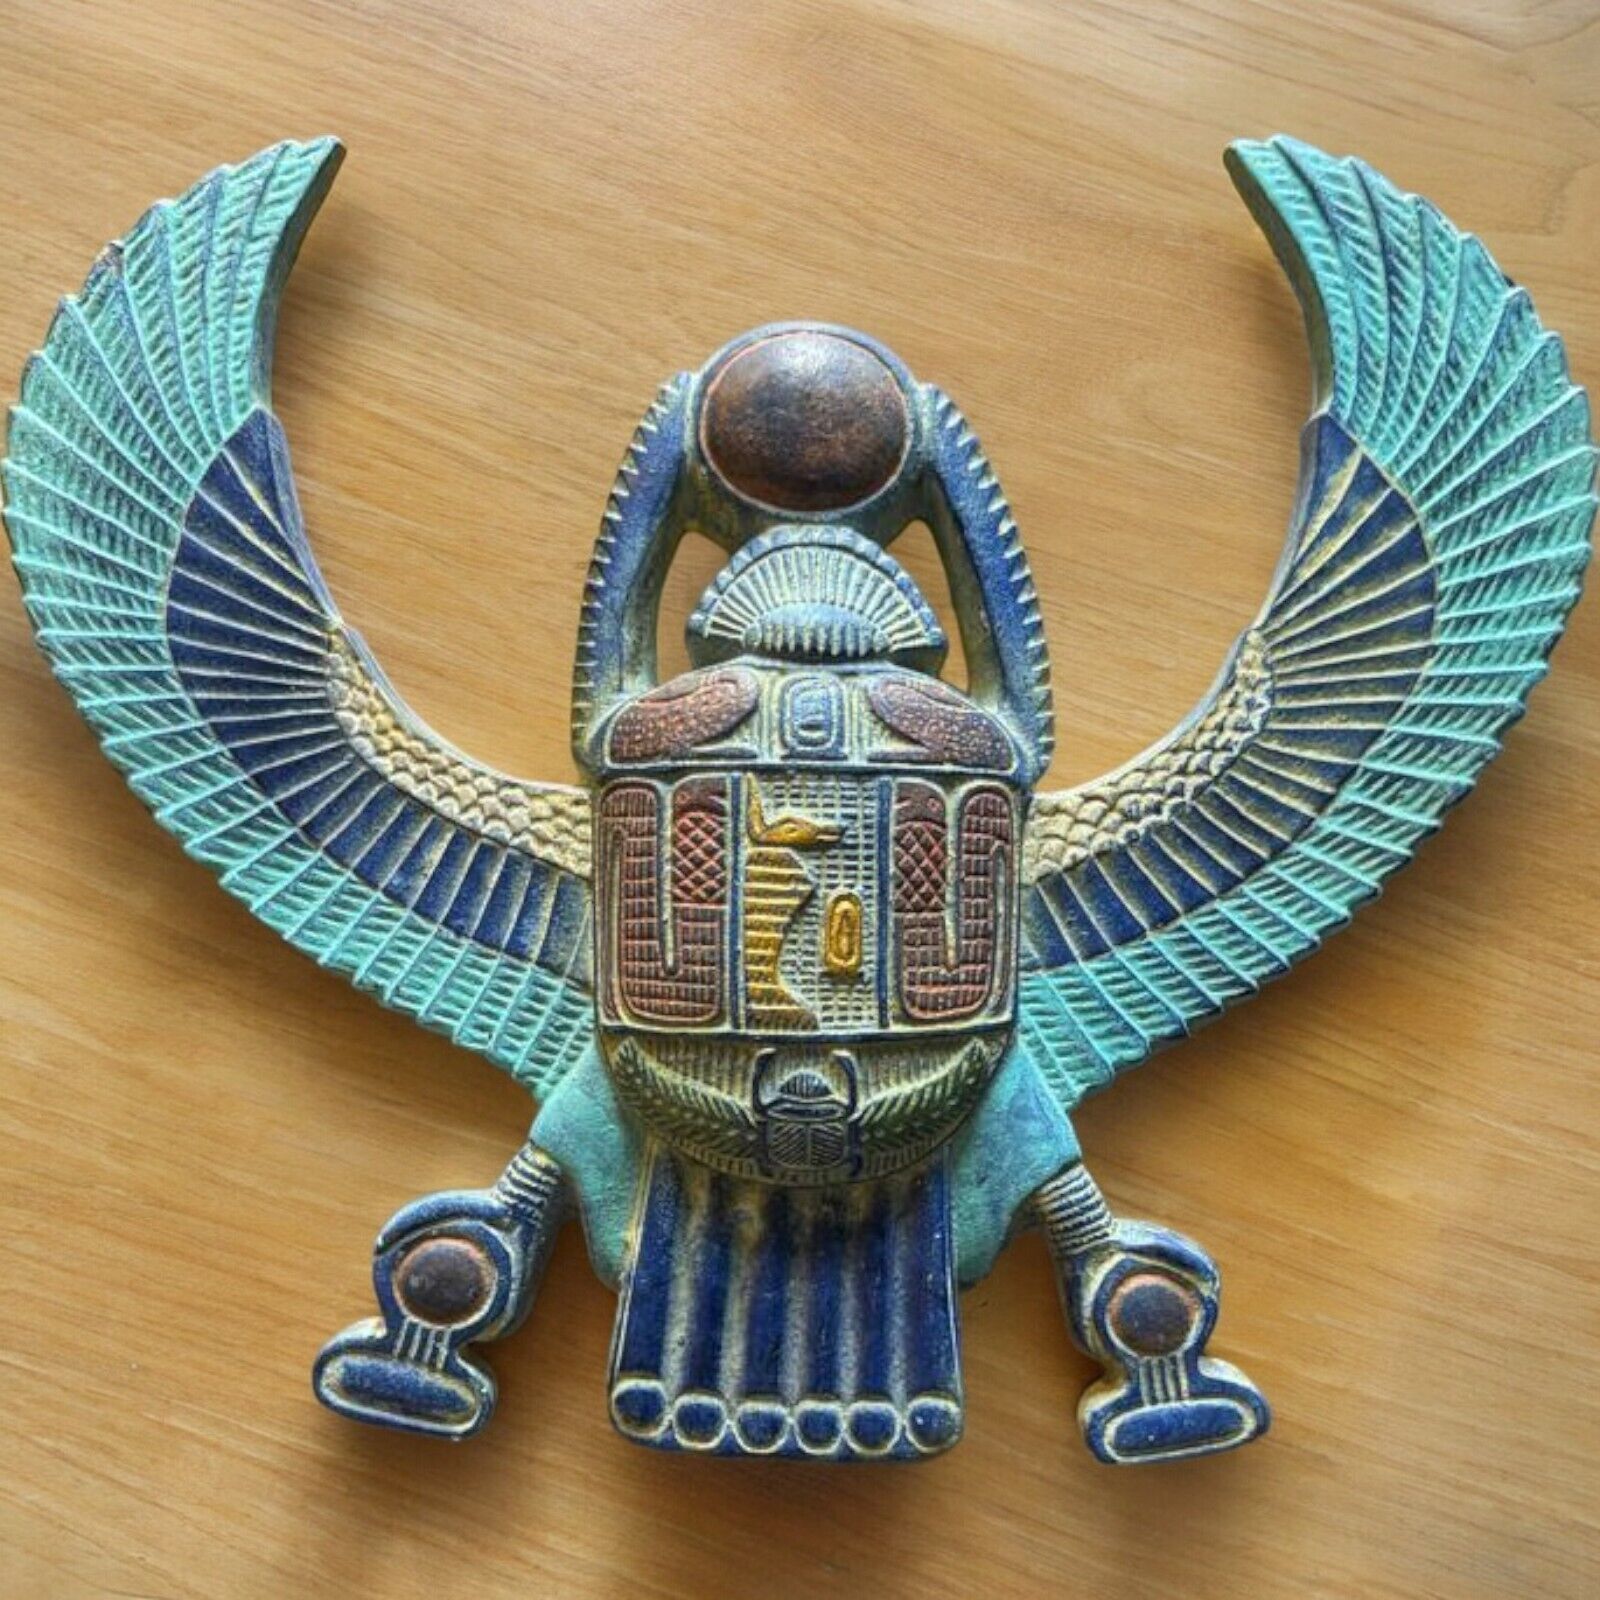 RARE ANCIENT EGYPTIAN ANTIQUES Scarab Beetle Large Winged Hanging on the Wall